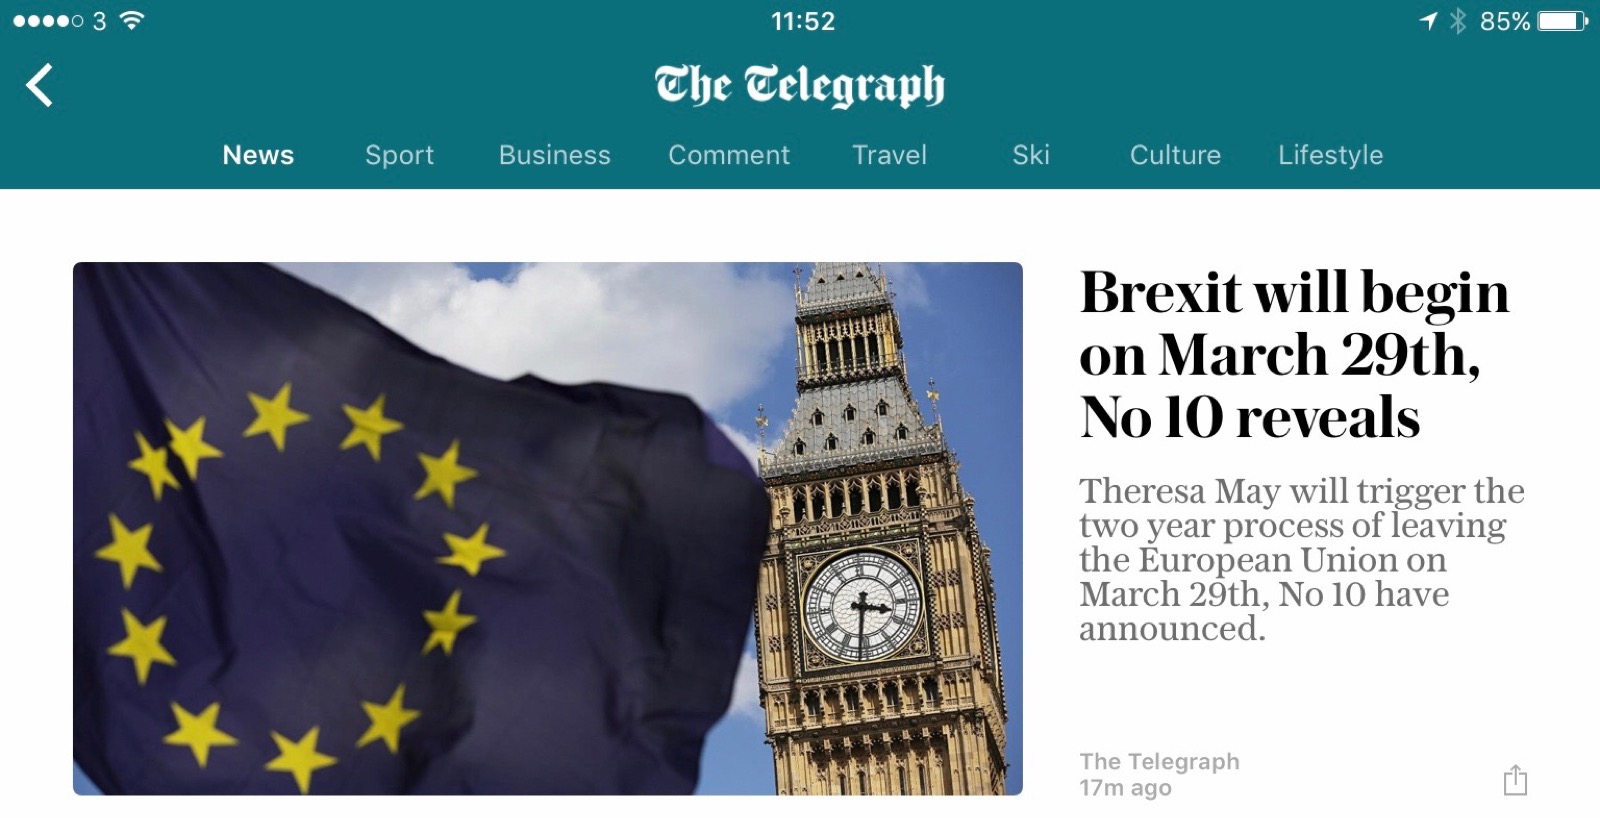 Apple News is working, says The Telegraph